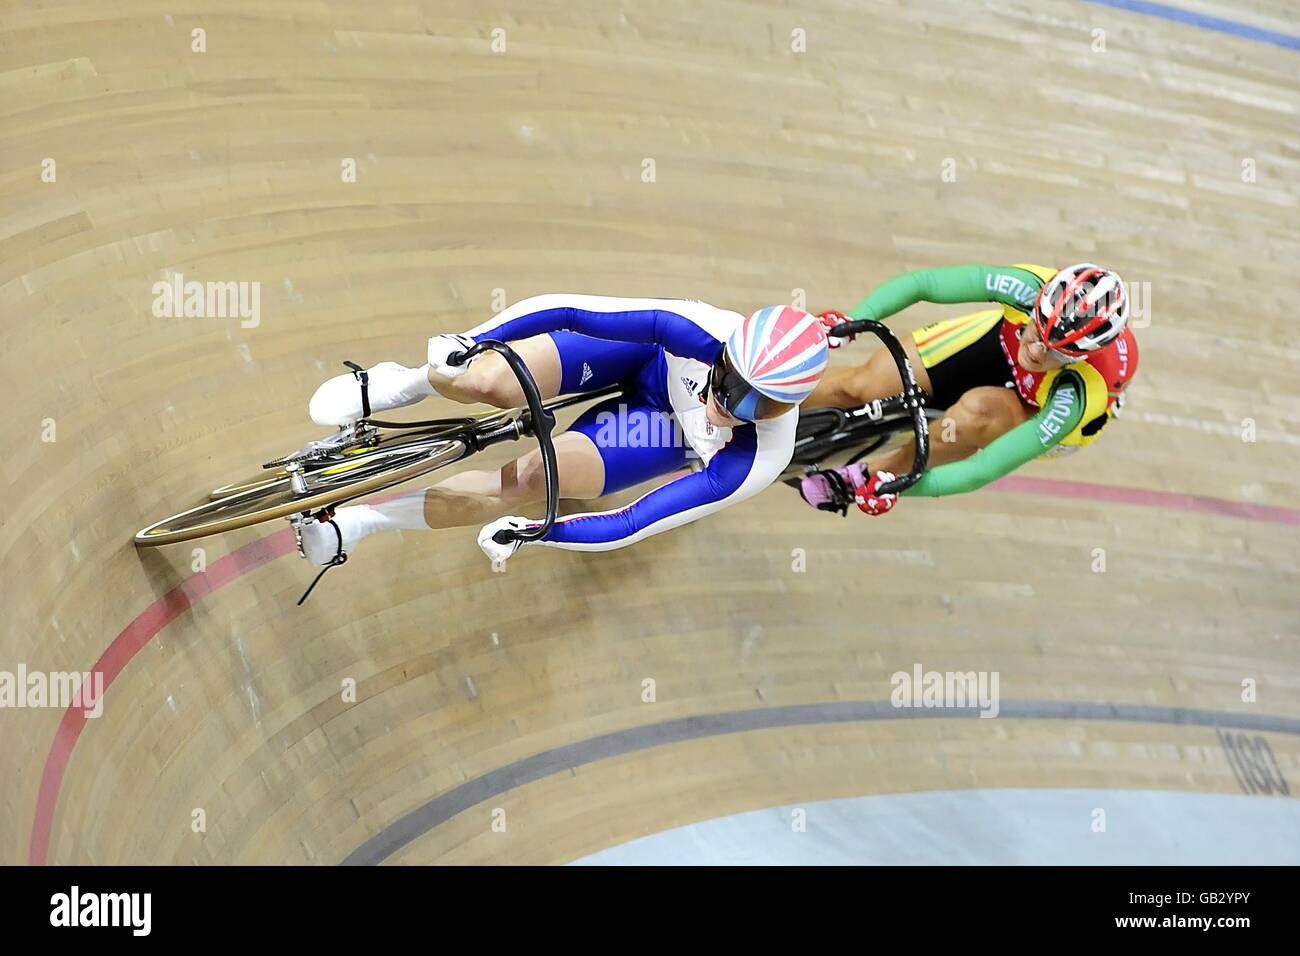 Great Britain's Victoria Pendleton (left) and Lithuania's Simona Krupeckaite during the Women's Sprint Quarterfinals at the Laoshan Velodrome during the 2008 Beijing Olympic Games in China. Stock Photo